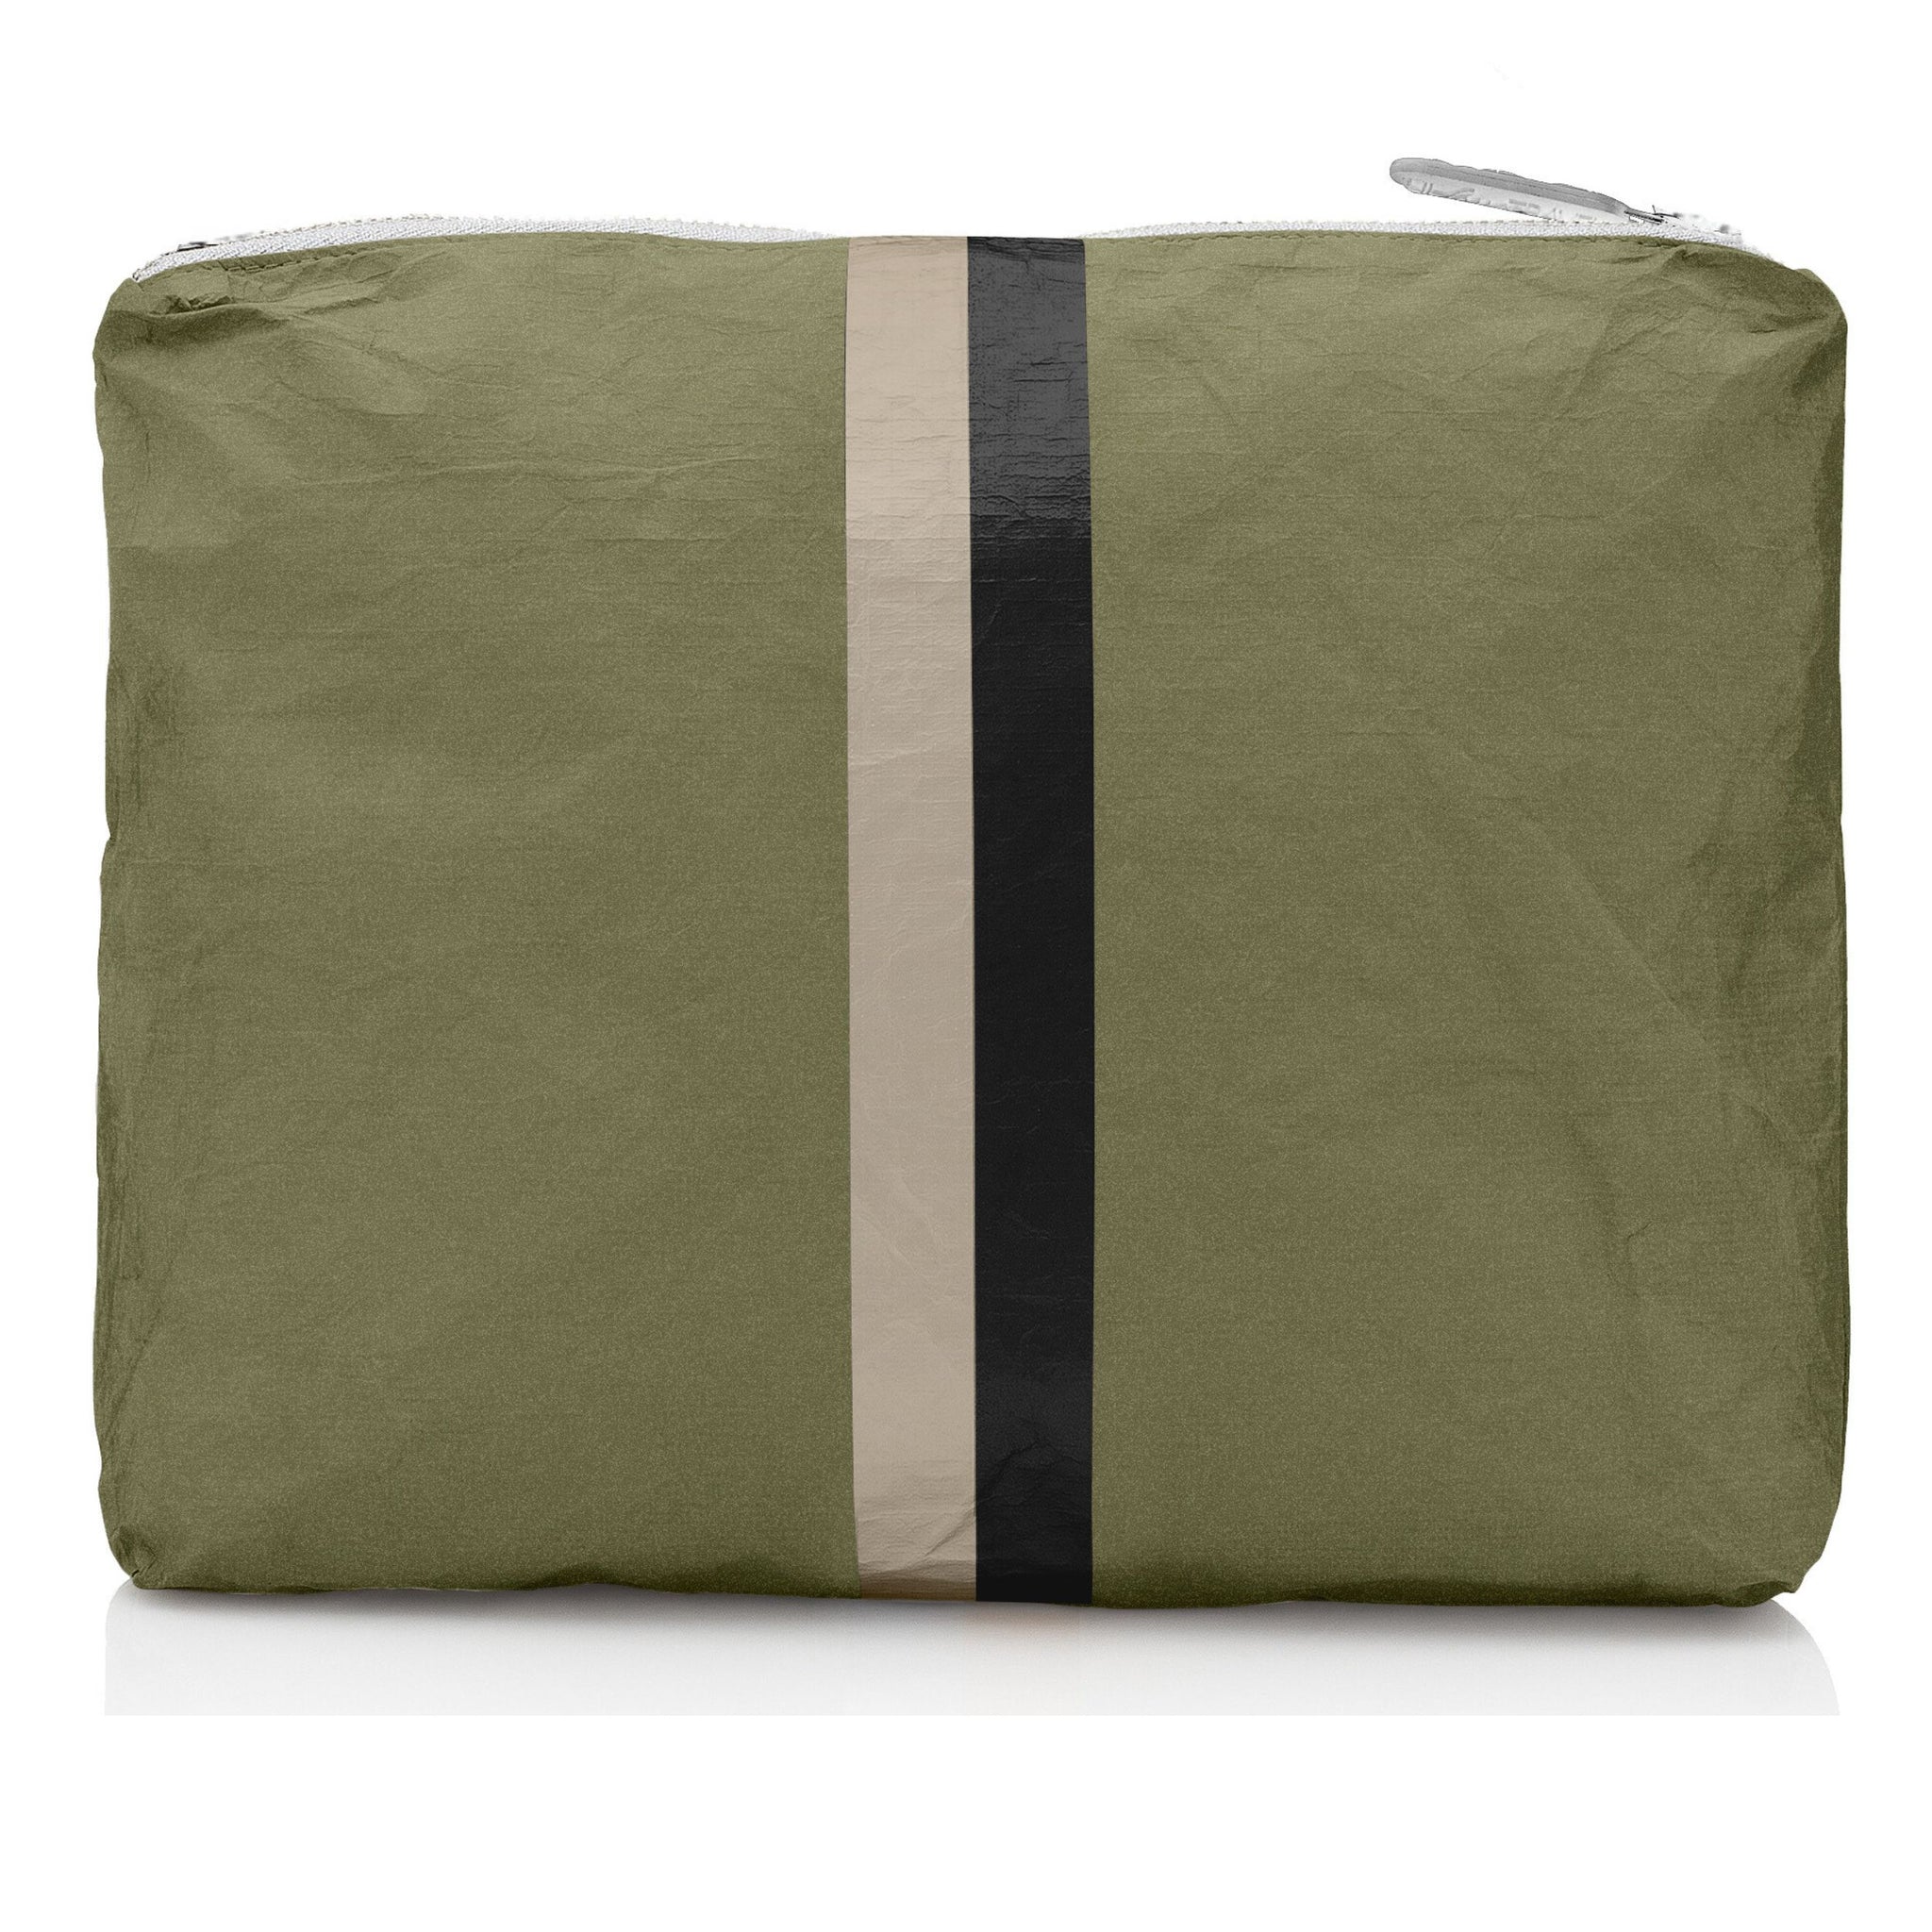 Pouch to Purse - Shimmer Army Green with Golden & Black Stripes